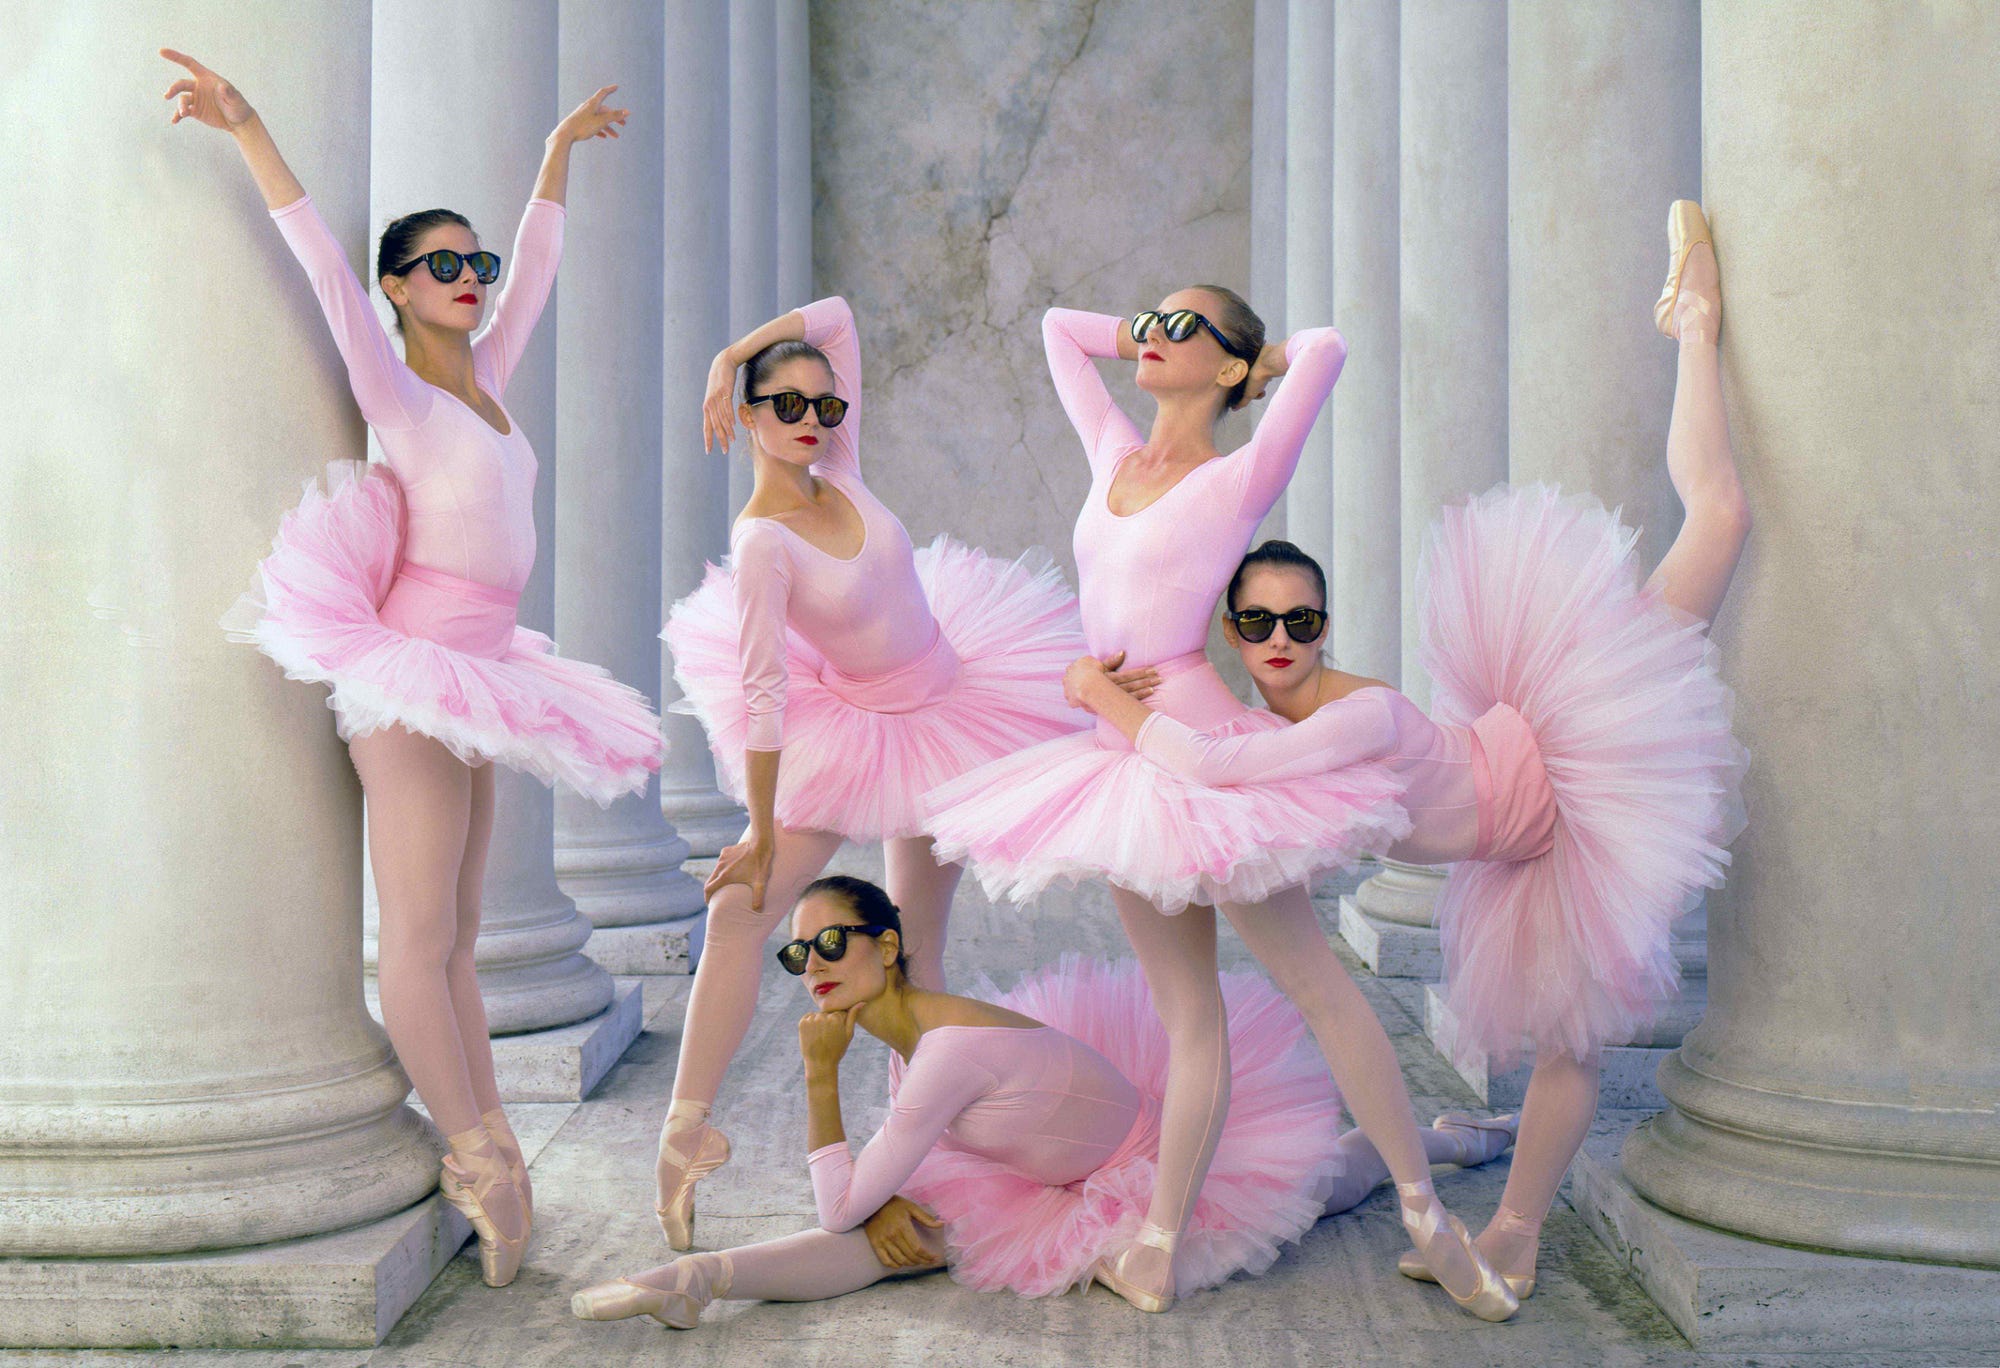 Tale of the Hot Pink Tutu. Dancers of the San Francisco Ballet